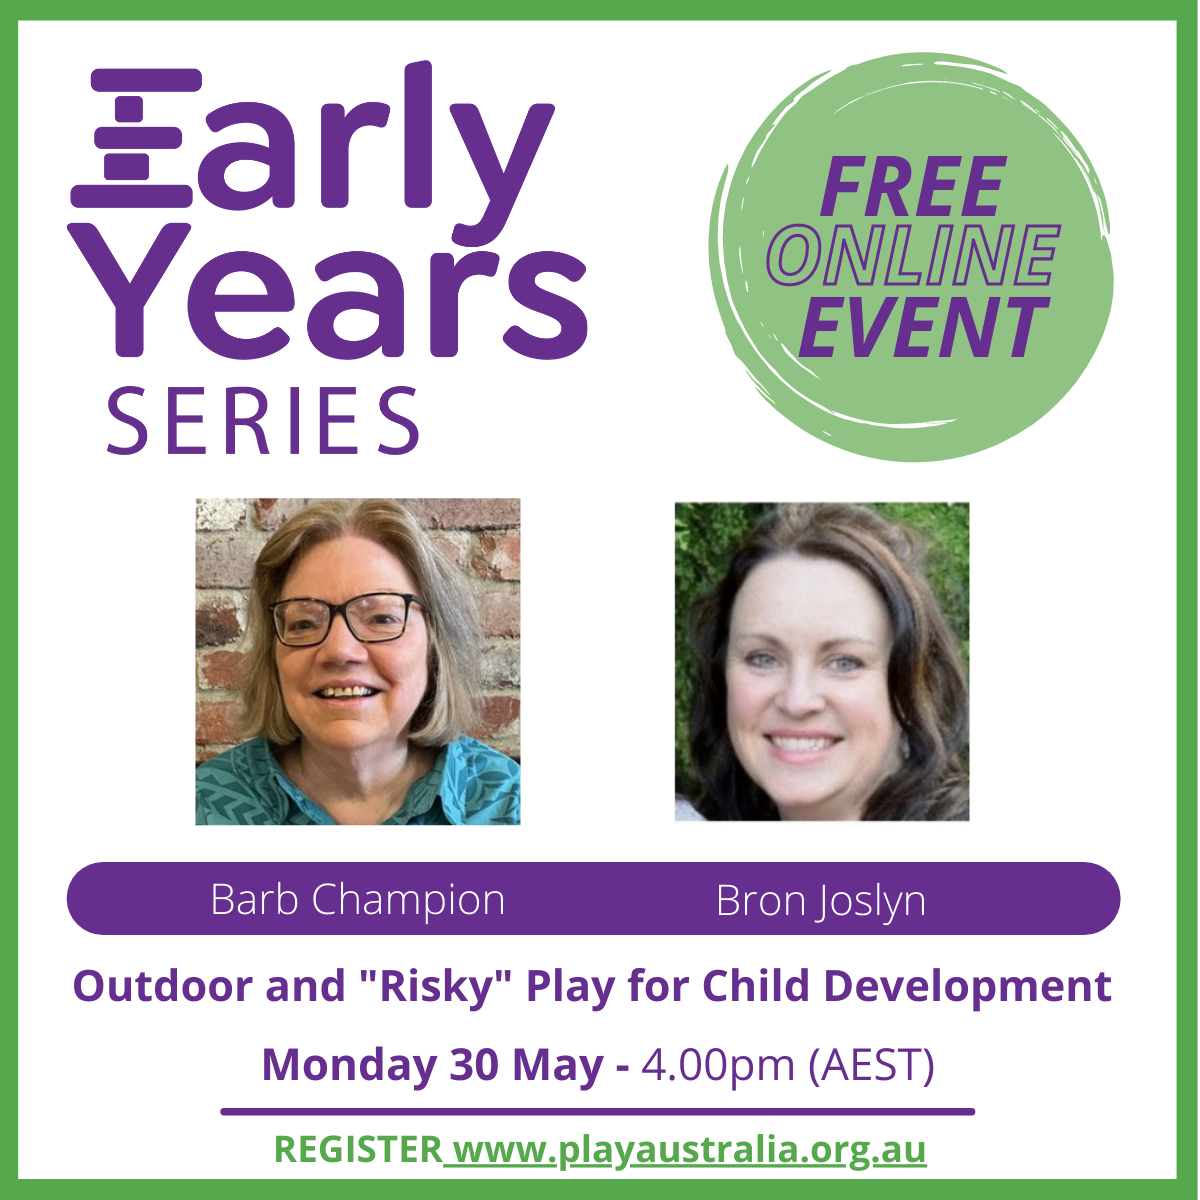 Early Years Series, Outdoor and Risky Play for Child Development